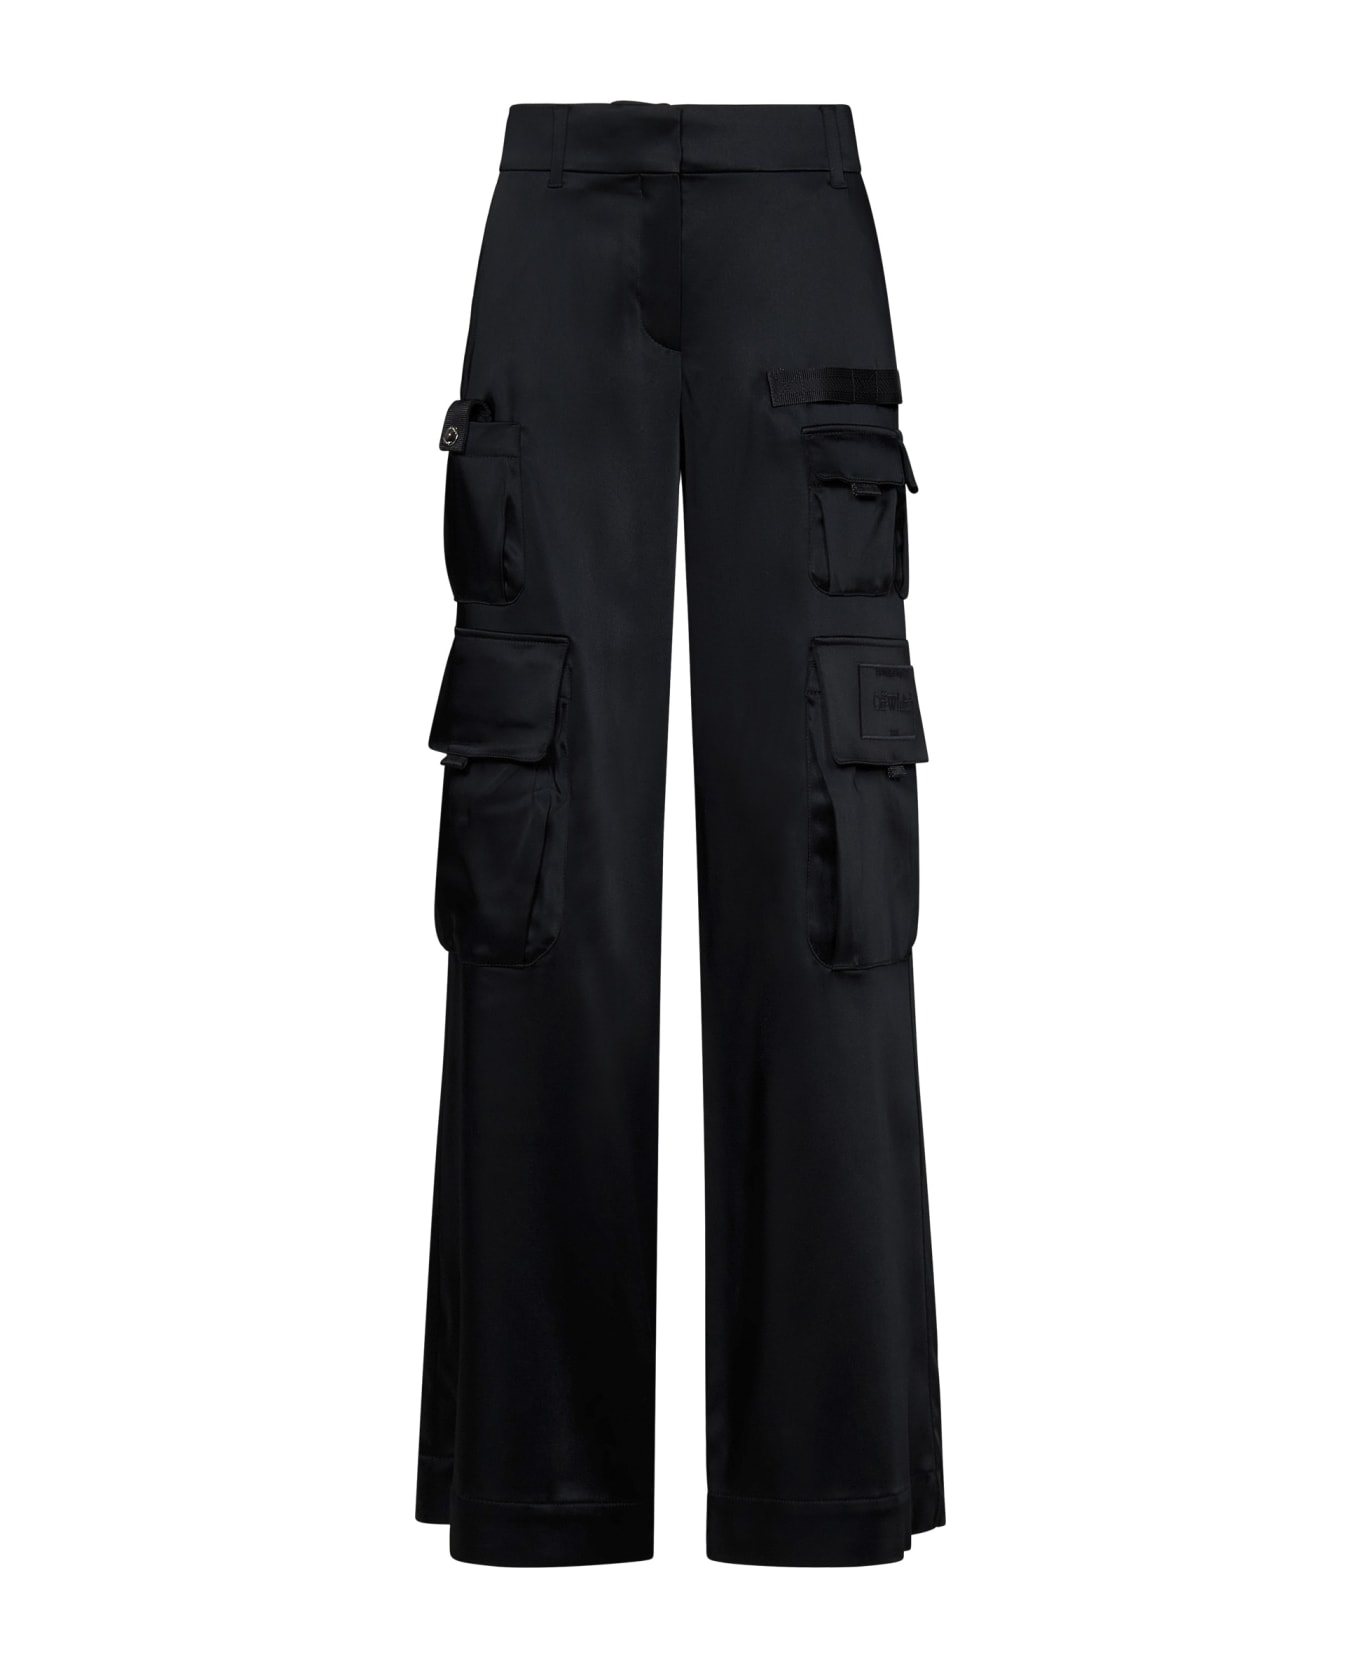 Off-White Trousers - Black ボトムス